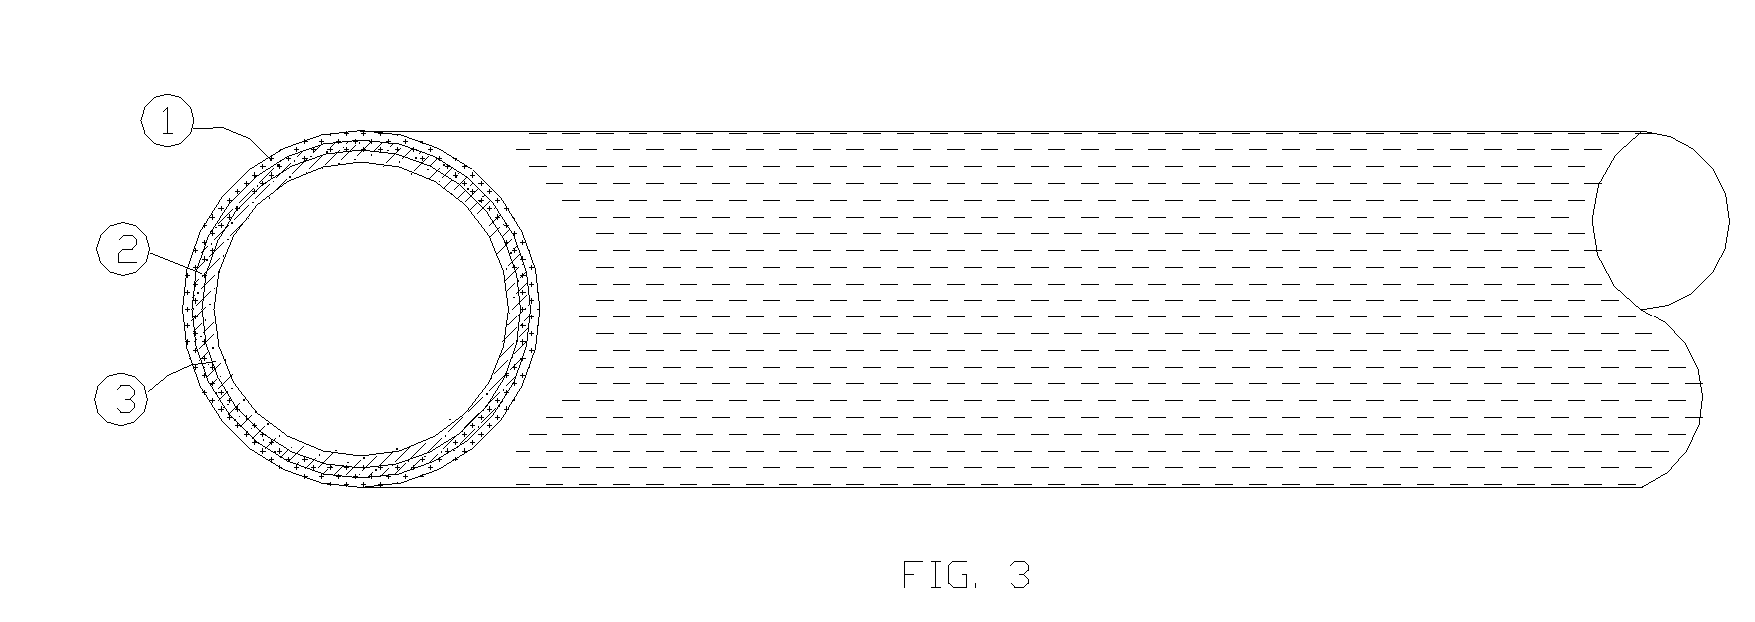 Improved multiple layered membrane with thin fluorine containing polymer layer